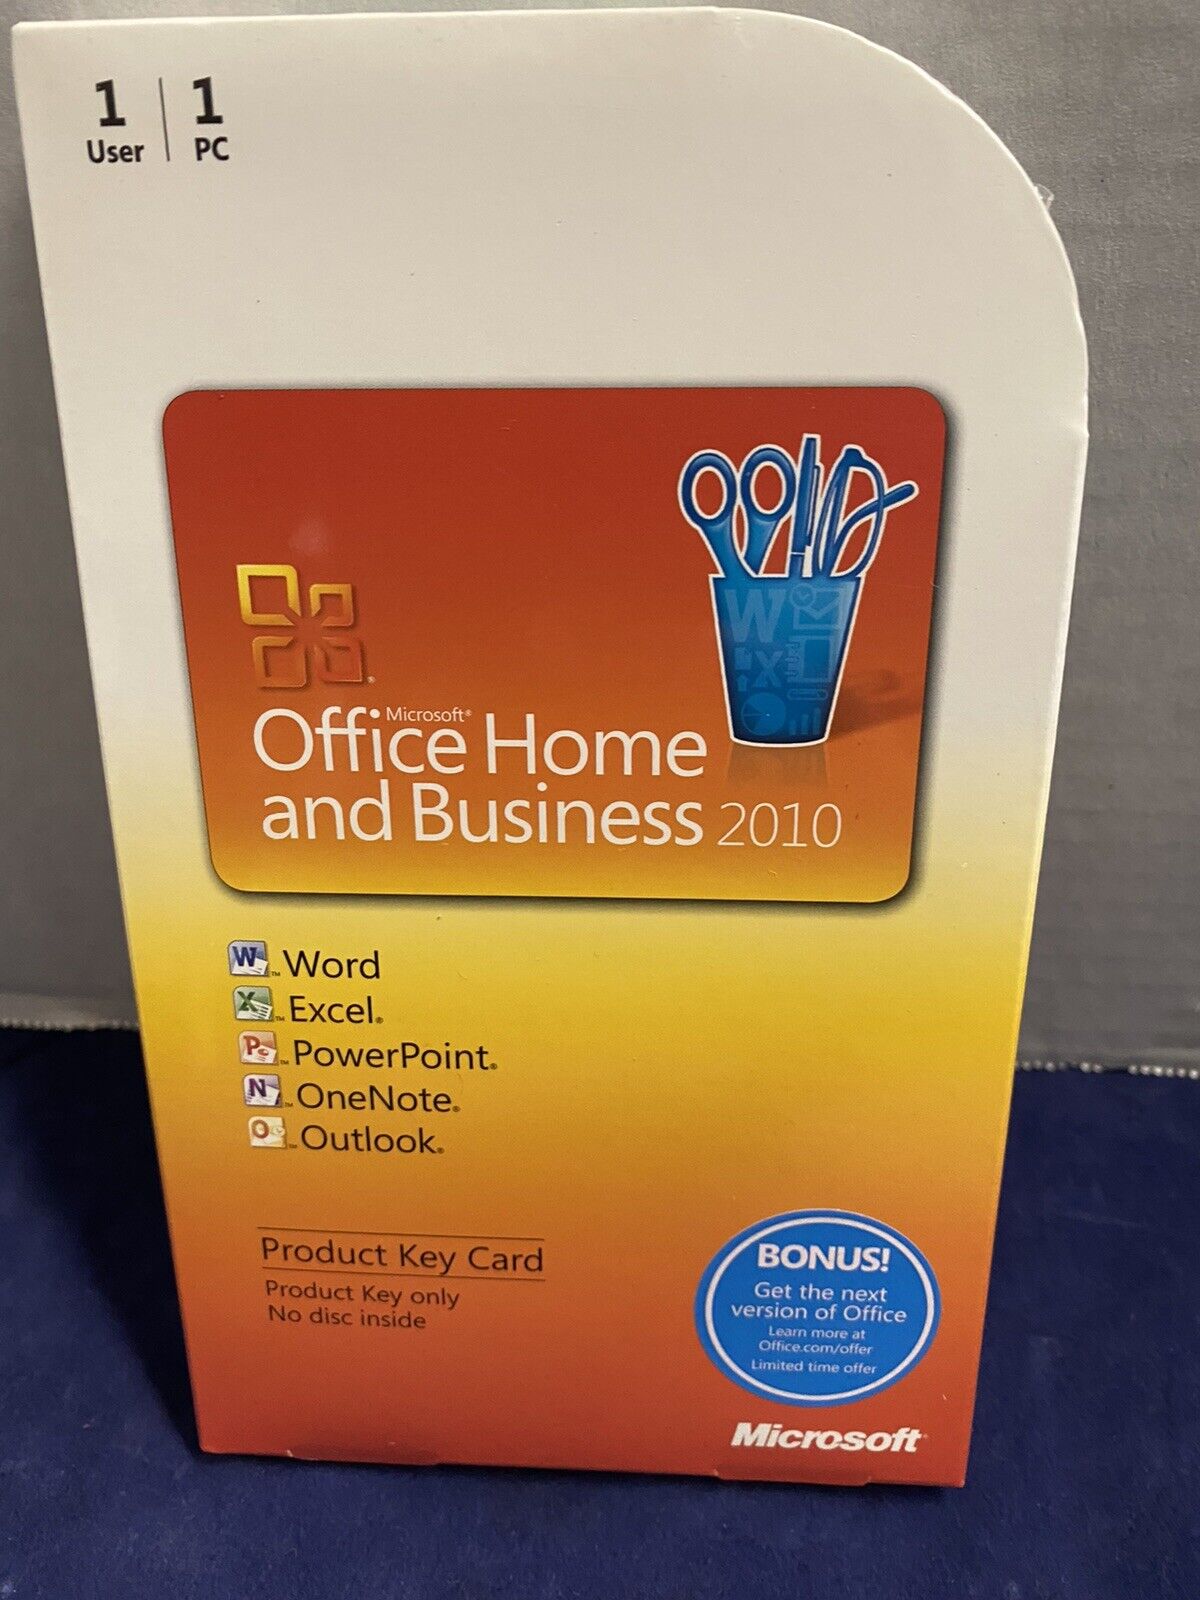 NEW MICROSOFT OFFICE 2010 HOME AND BUSINESS PRODUCT KEY CARD (PKC)